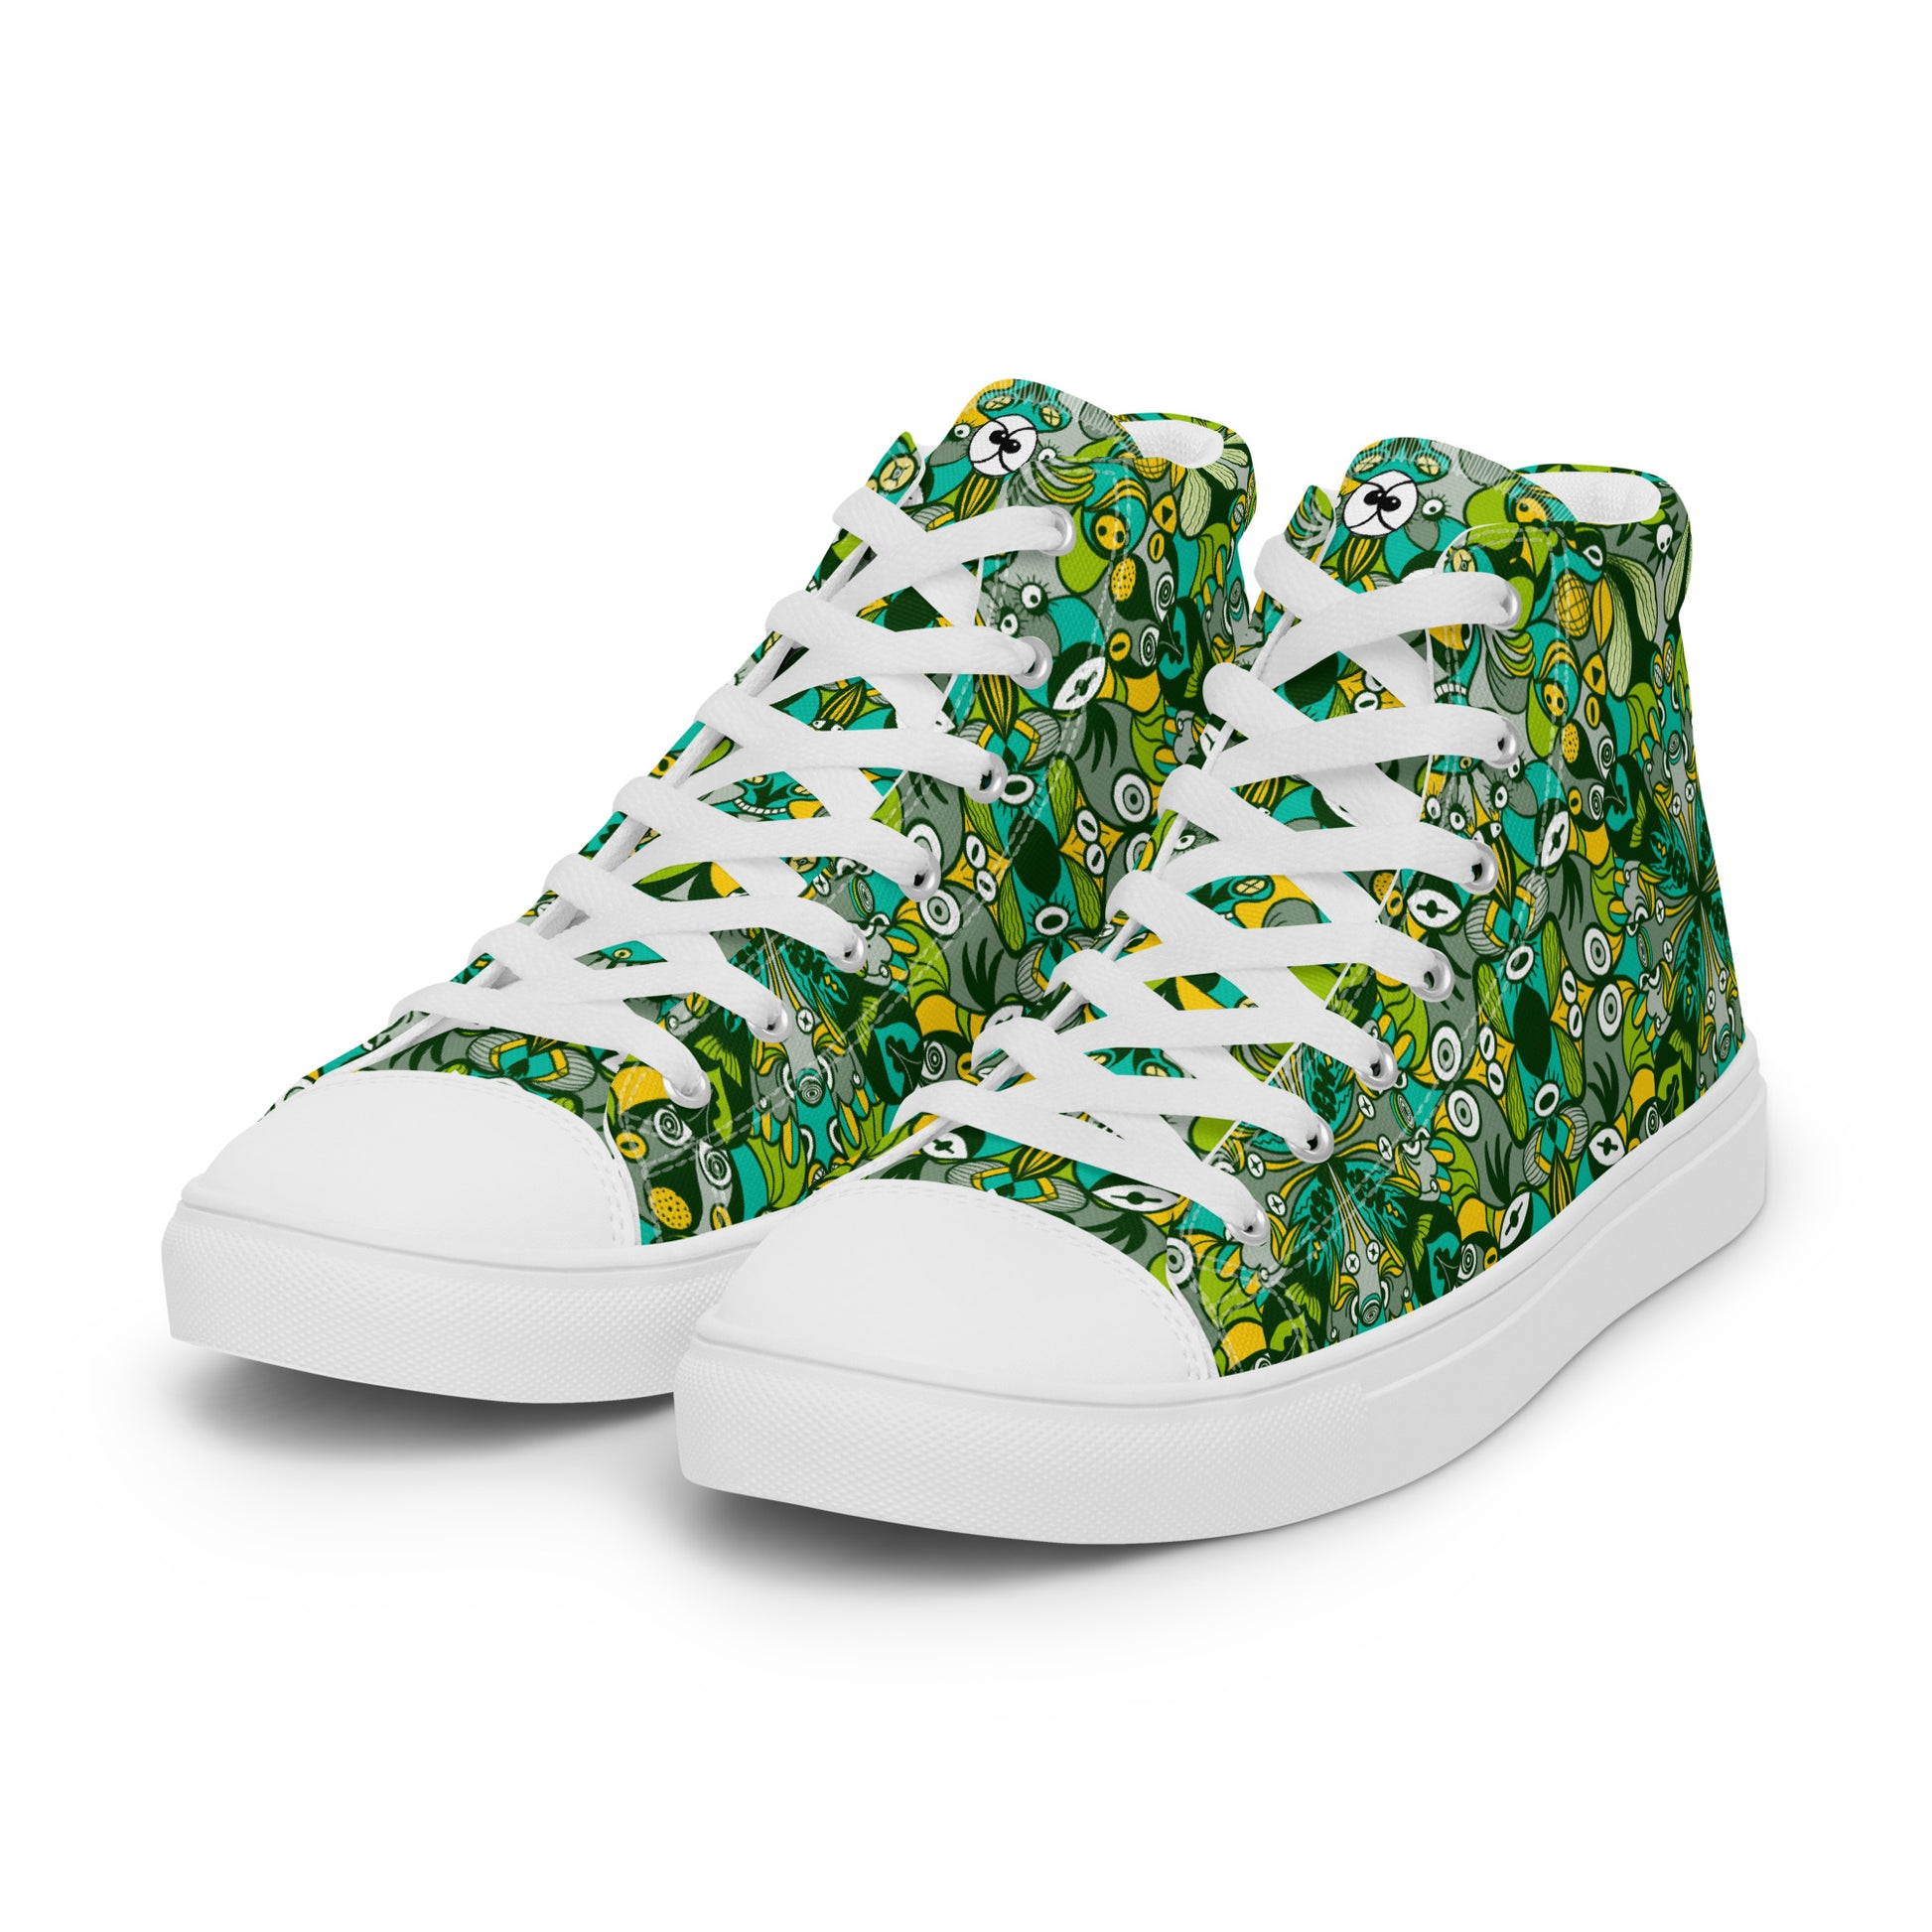 Join the funniest alien doodling network in the universe Men’s high top canvas shoes. Overview